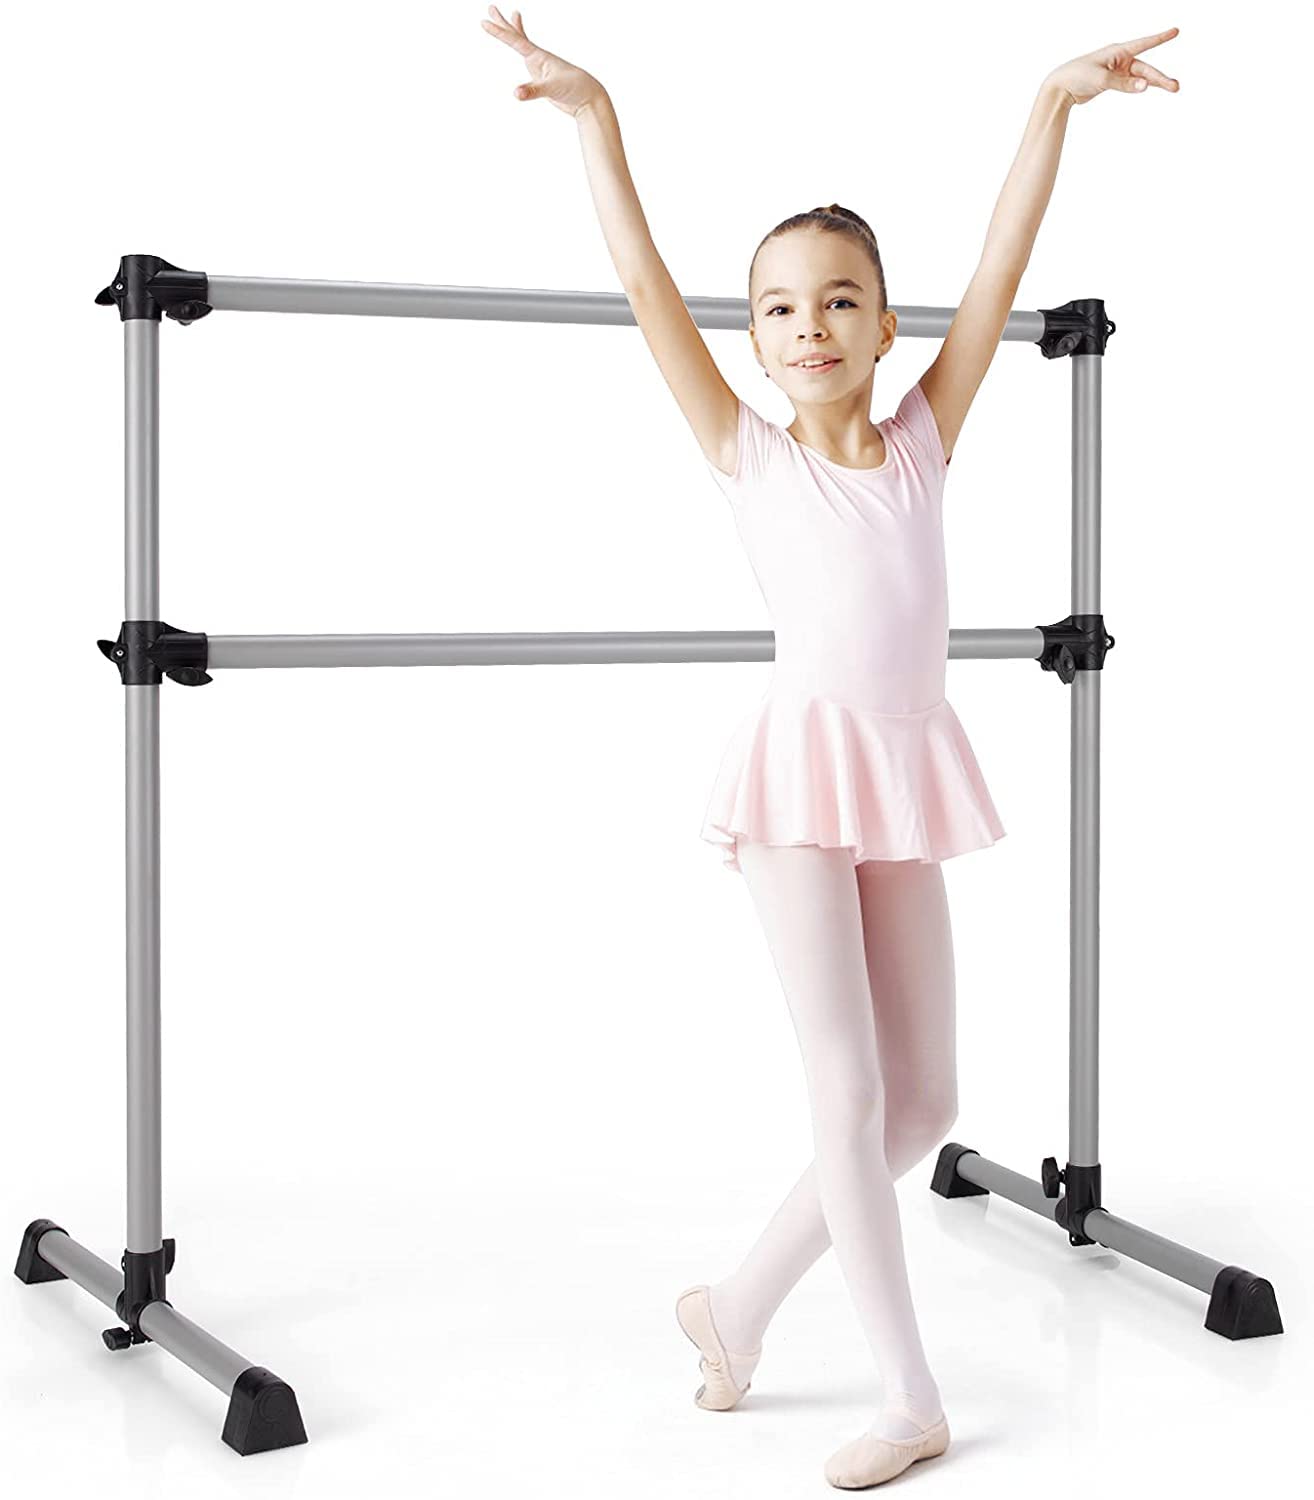 Portable Ballet Barre,53.93 in.,code 113-Mobil